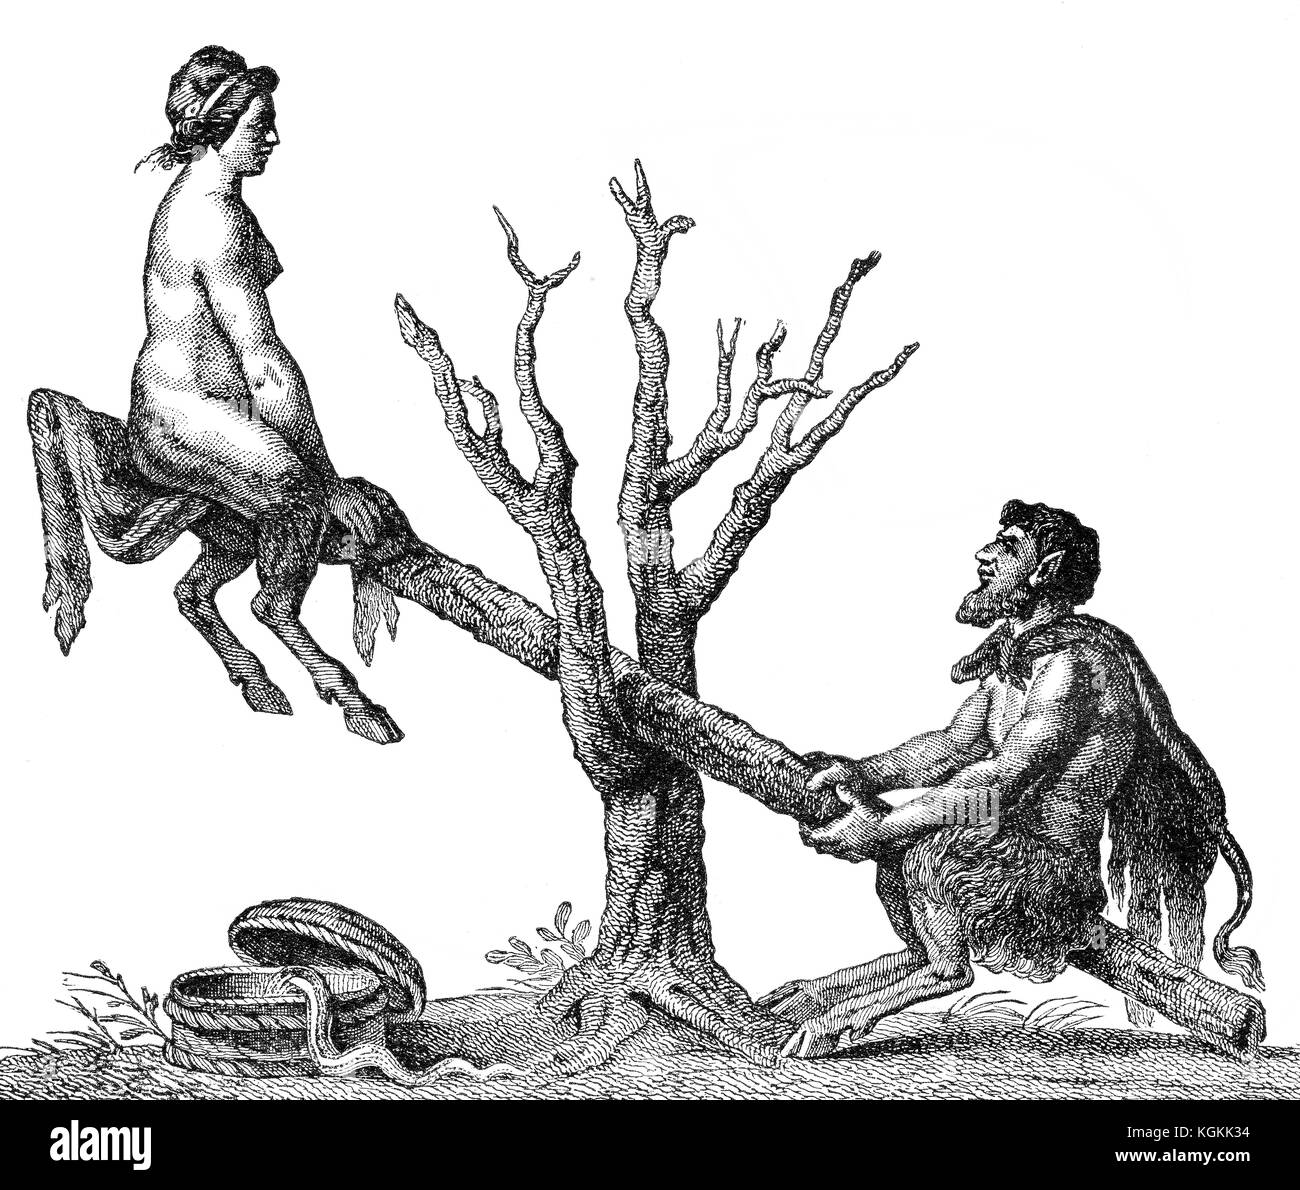 Caricature of Adam and Eve on a seesaw as devils Stock Photo